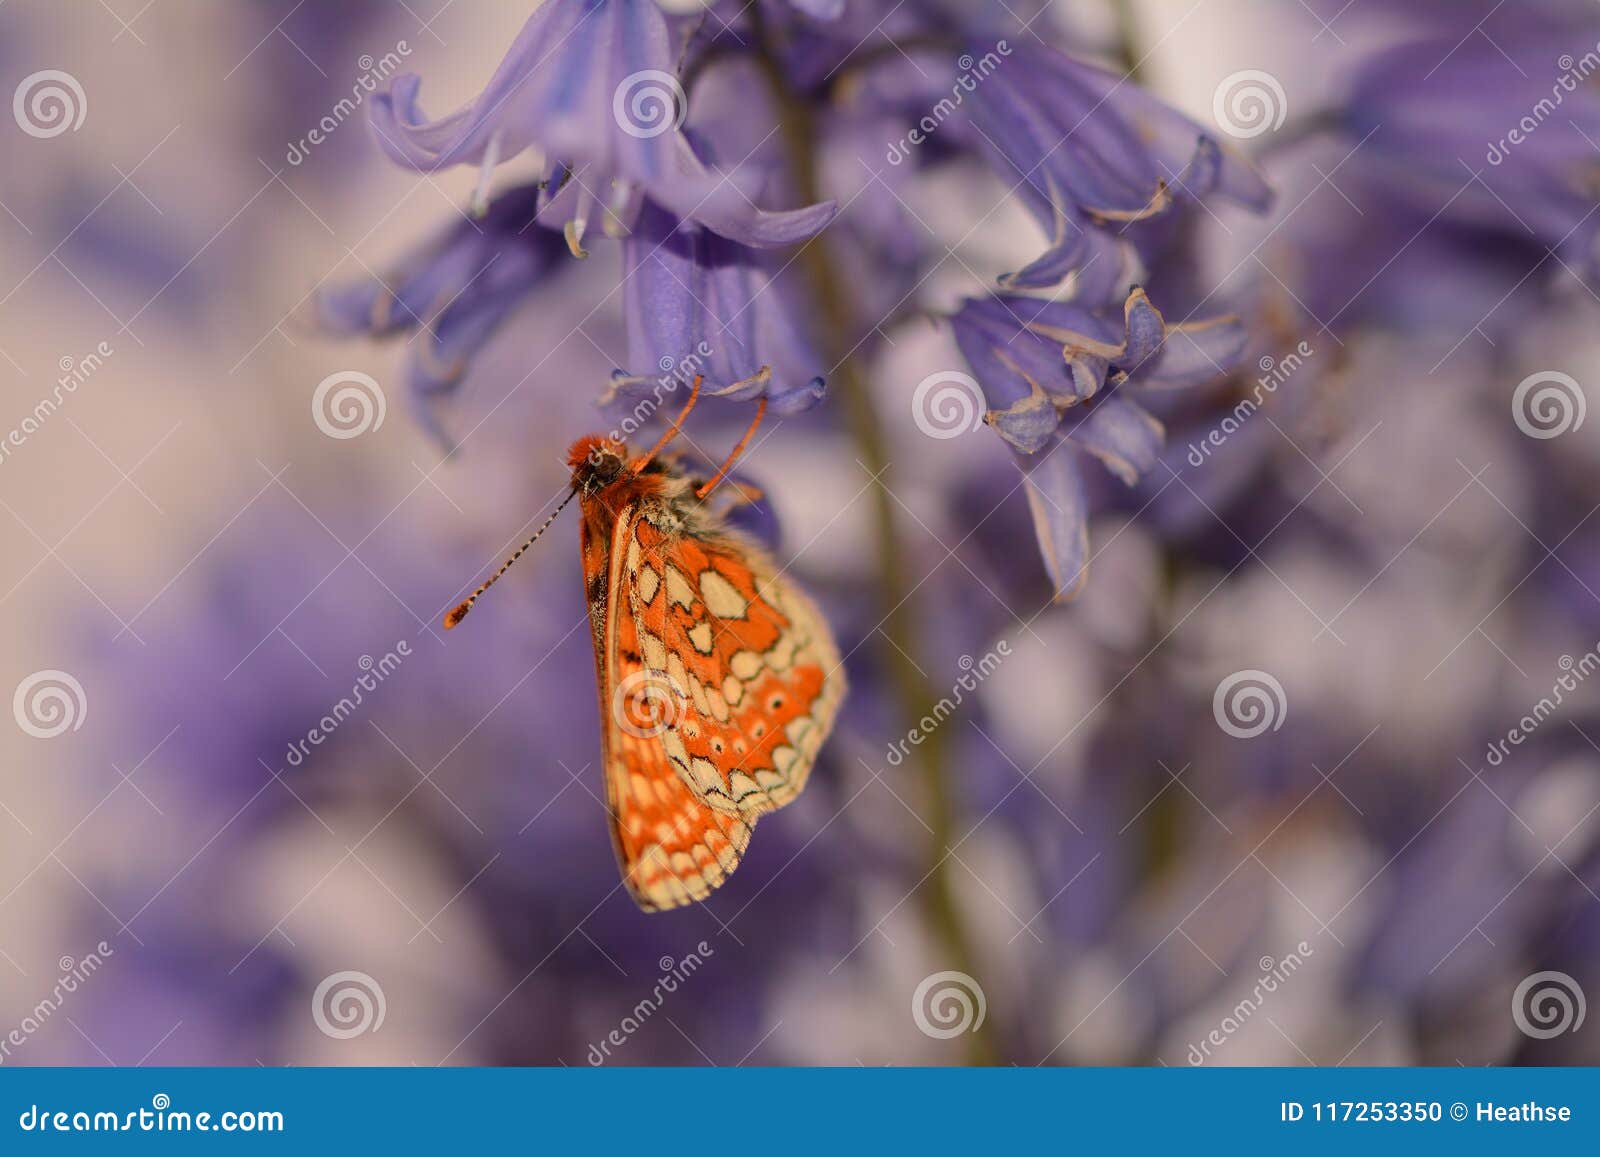 marsh fritillary butterfly , euphydryas aurinia, hanging from bluebell flower